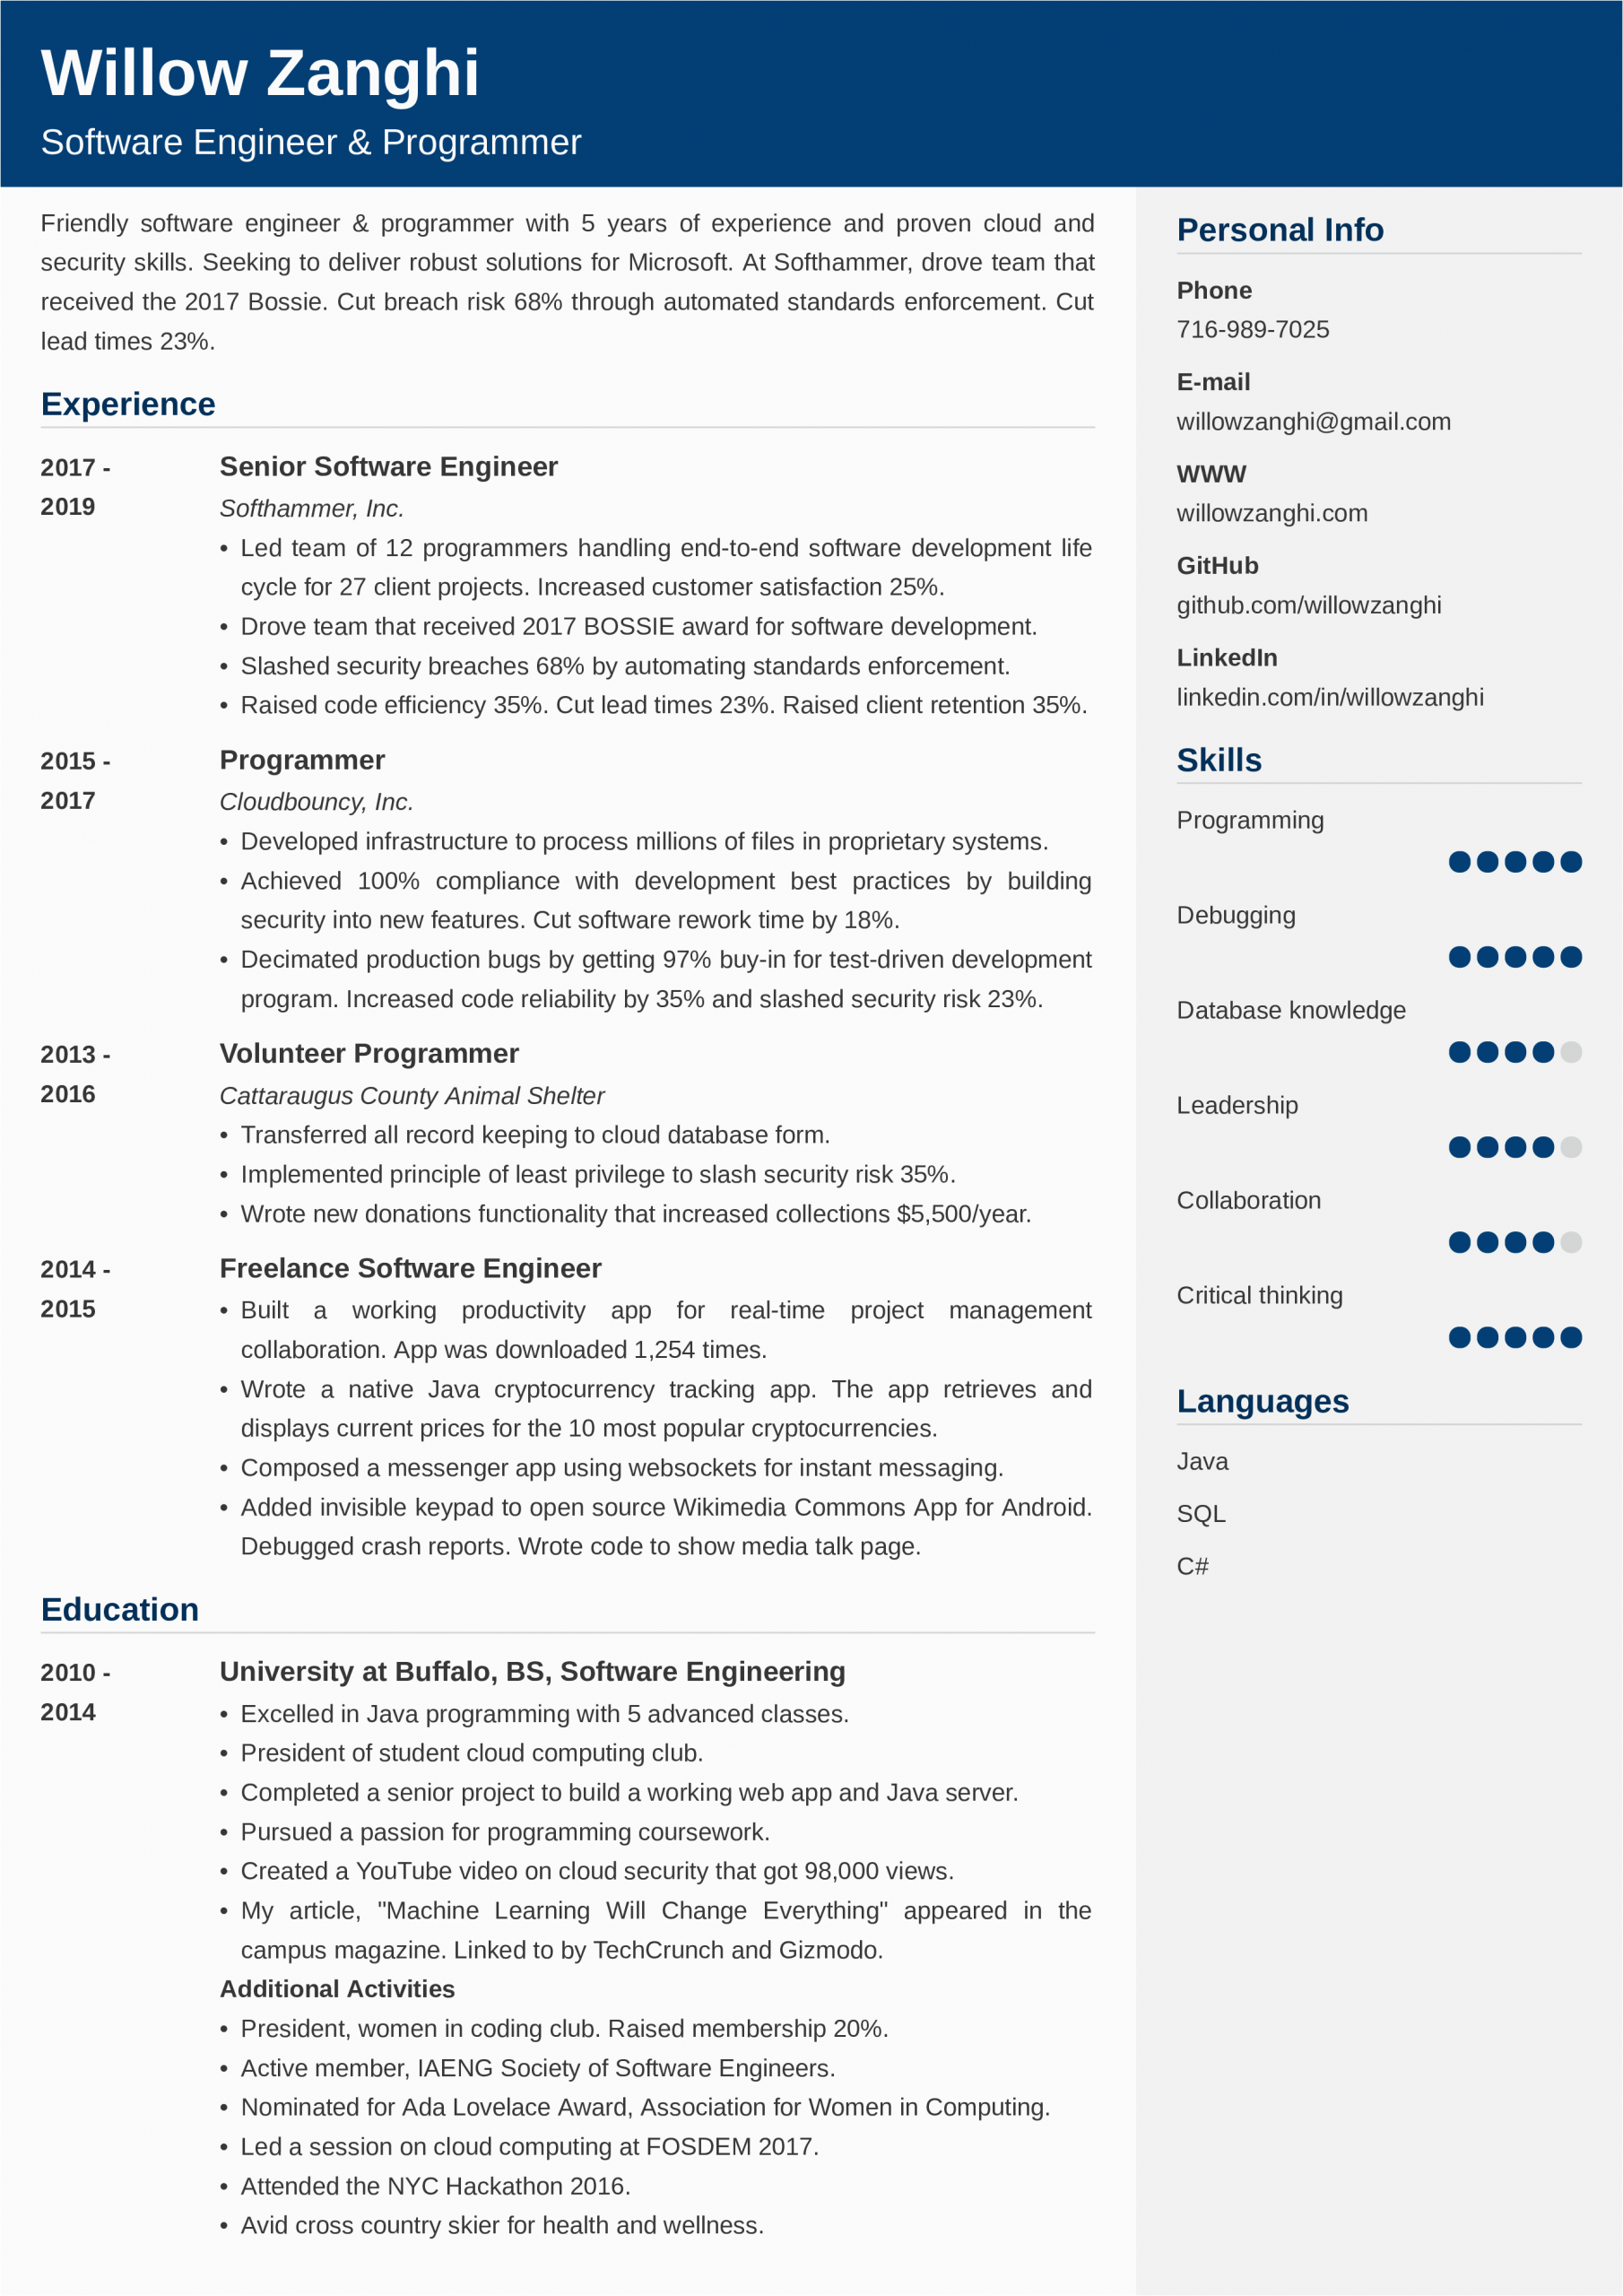 Download Resume Templates for software Engineer Engineering Resume Templates